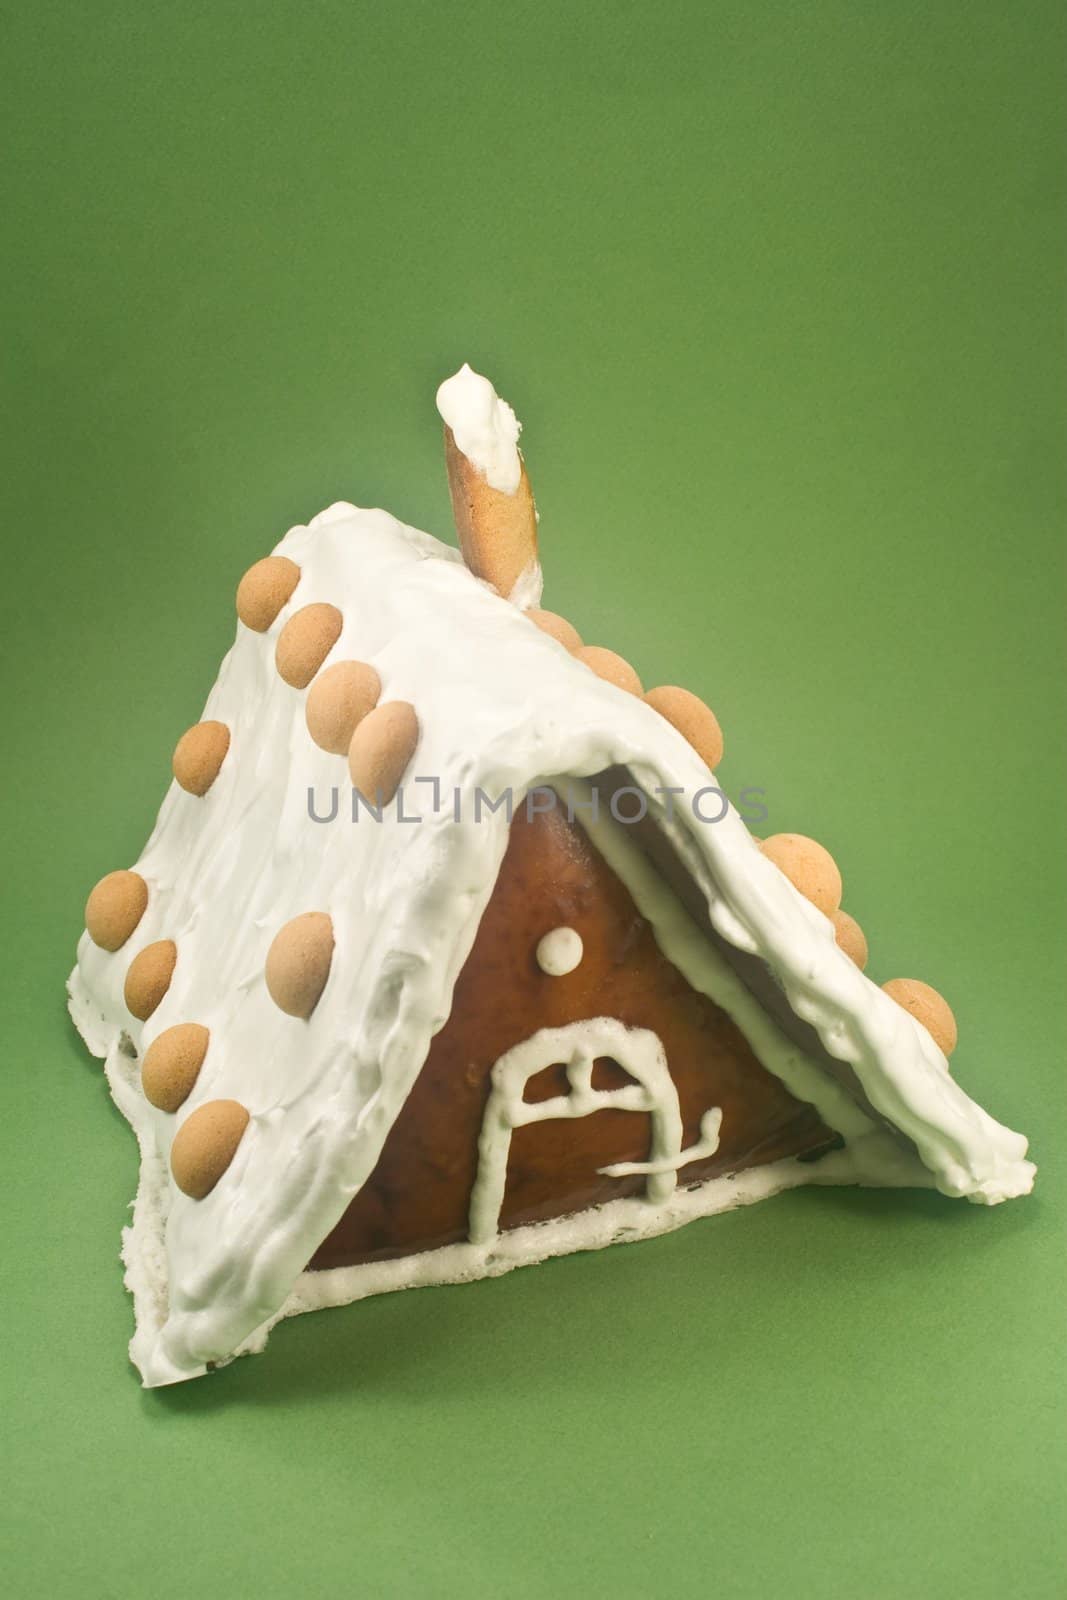 Gingerbread house by timscottrom